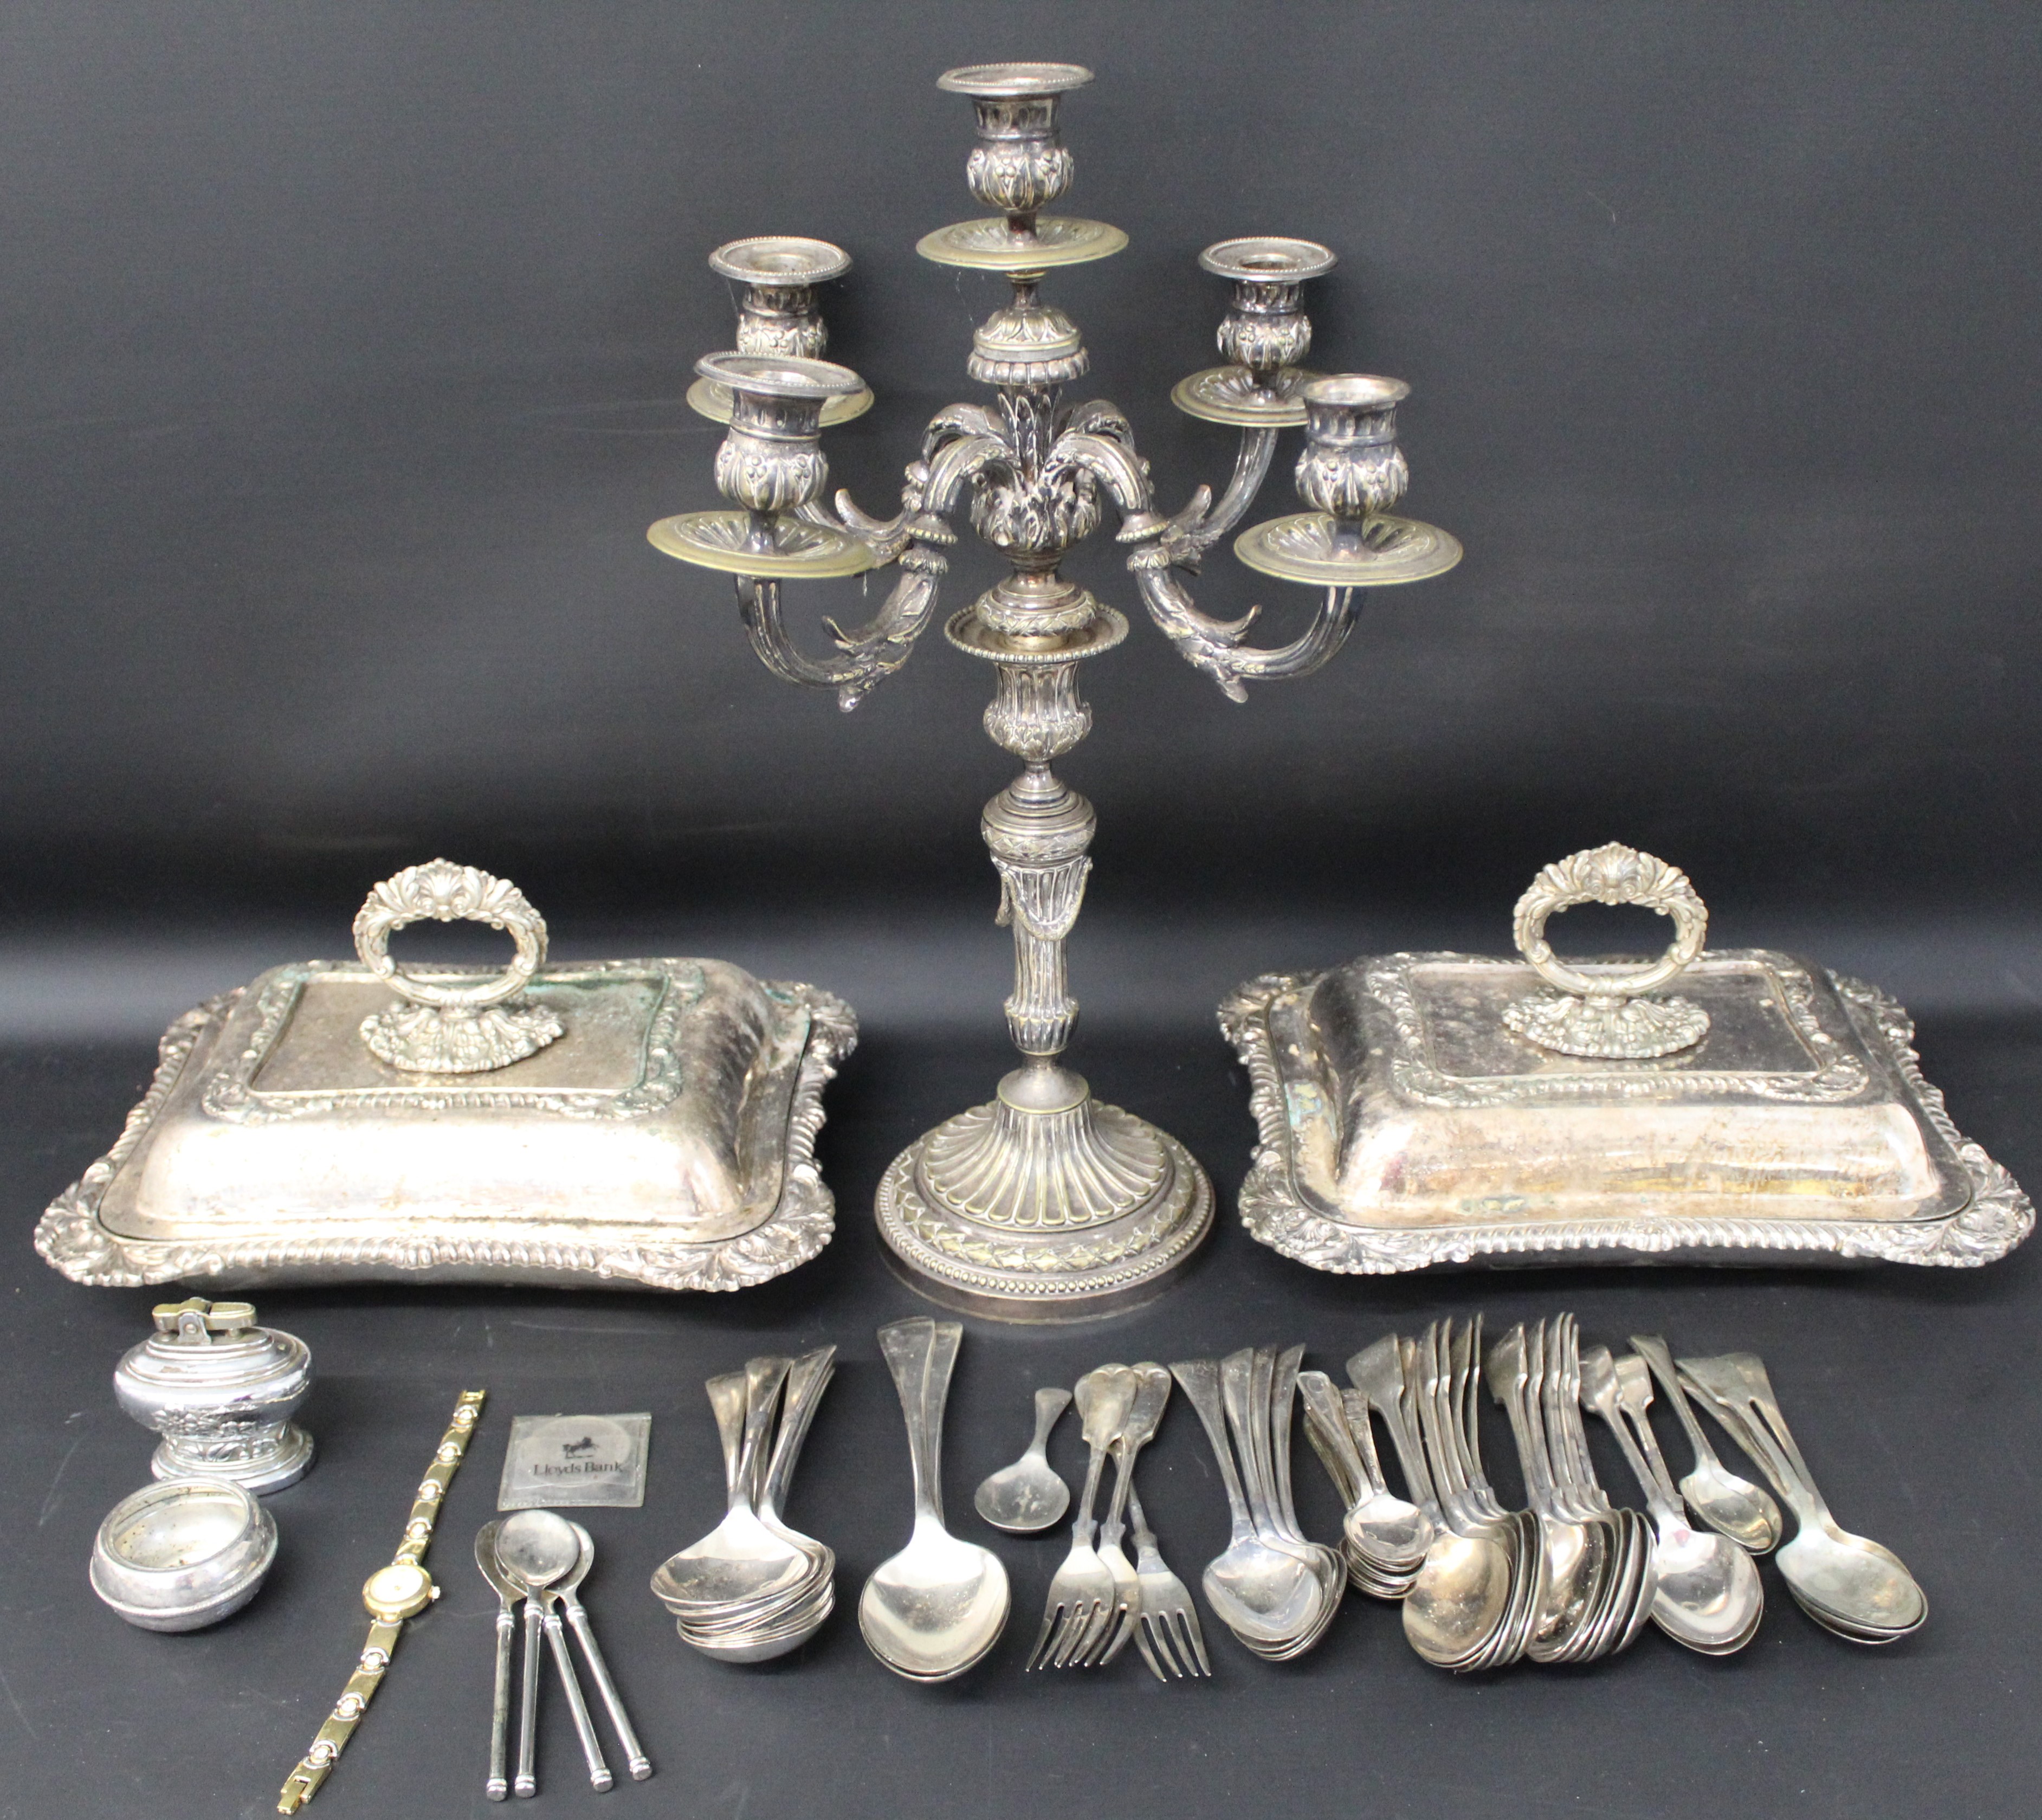 Pair of Victorian silver plated entrée dishes with detachable handles, candelabra, selection of